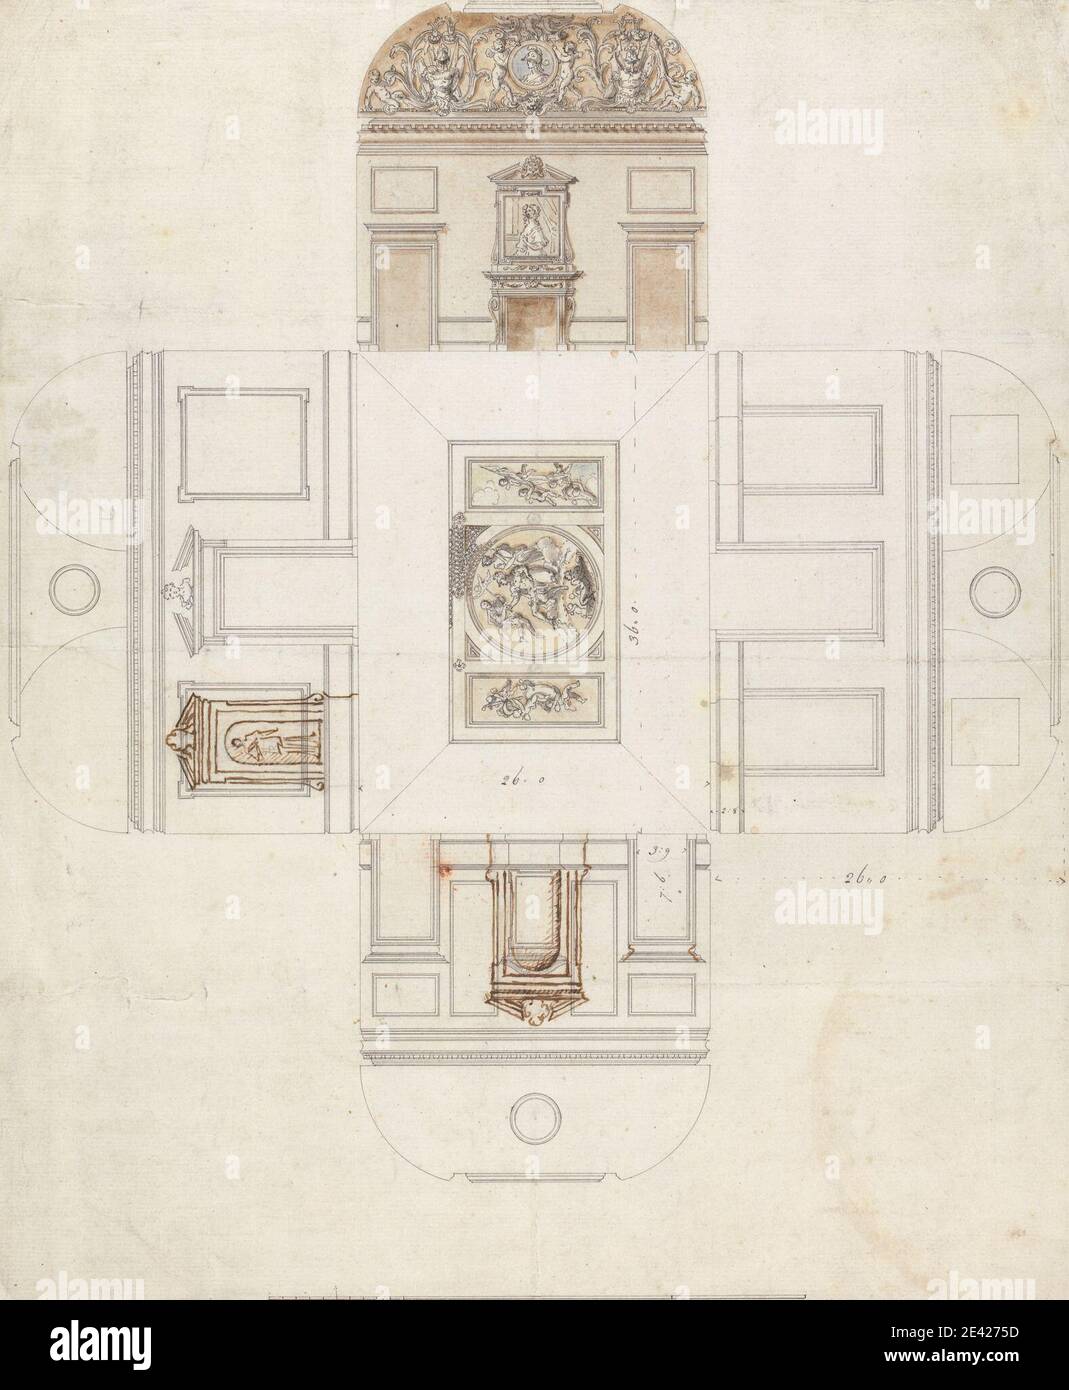 William Kent, ca.1686â€“1748, British, Stowe House, Buckinghamshire: Design for Ceiling and Wall Decoration, between 1728 and 1732. Graphite, pen and black and brown ink, brown and gray wash on moderately thick, slightly textured, white laid paper with four fold marks bar scale of 2/13 inch to 1 foot.   architectural subject , ceiling , cove ceilings , Palladian , plans (drawings) , reflected ceiling plans. Buckingham , Buckinghamshire , England , Europe , Stowe house , United Kingdom Stock Photo